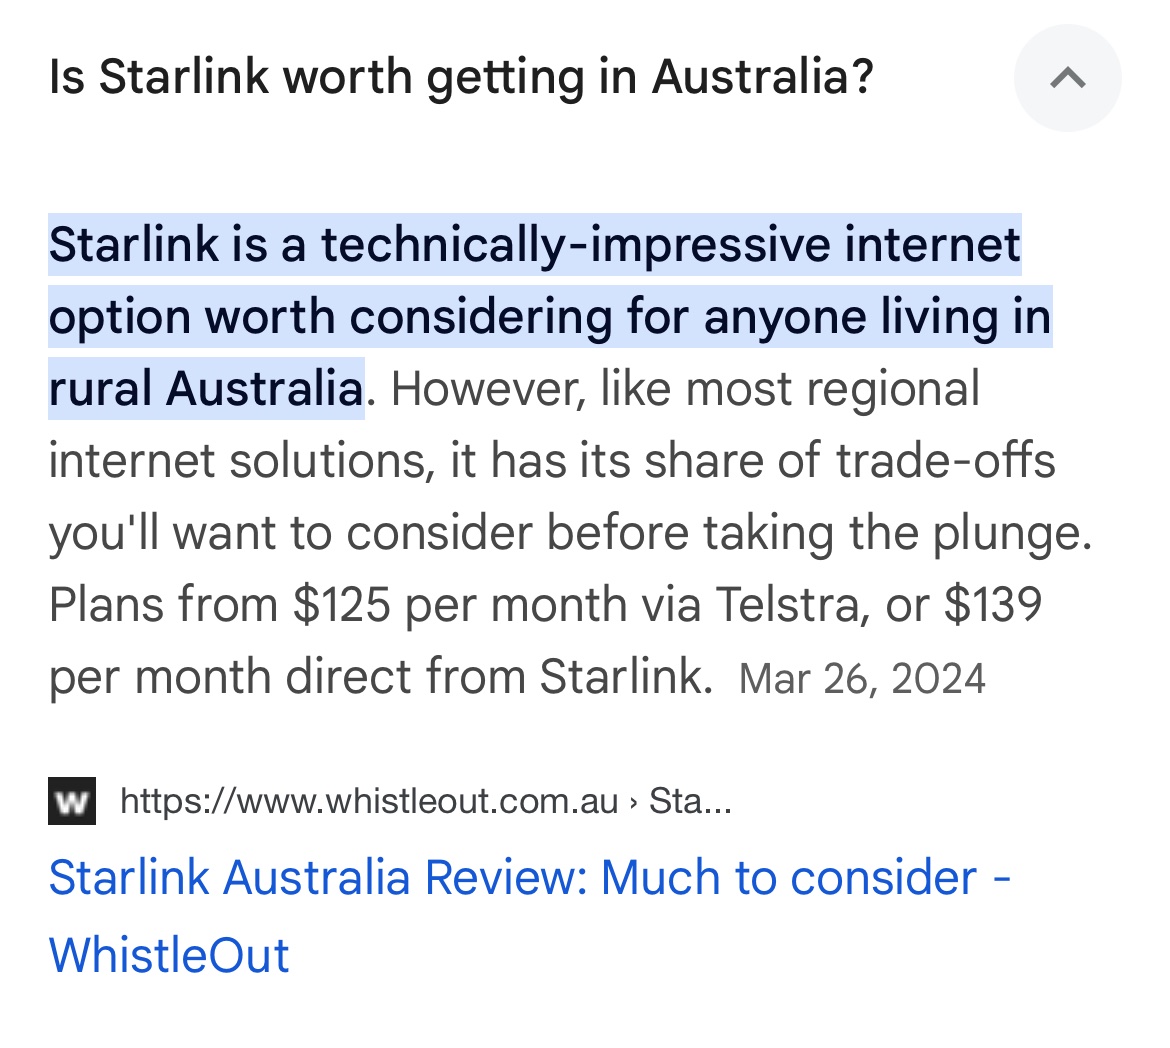 @Mwolltto Maybe you can get Starlink service now, through Telstra?